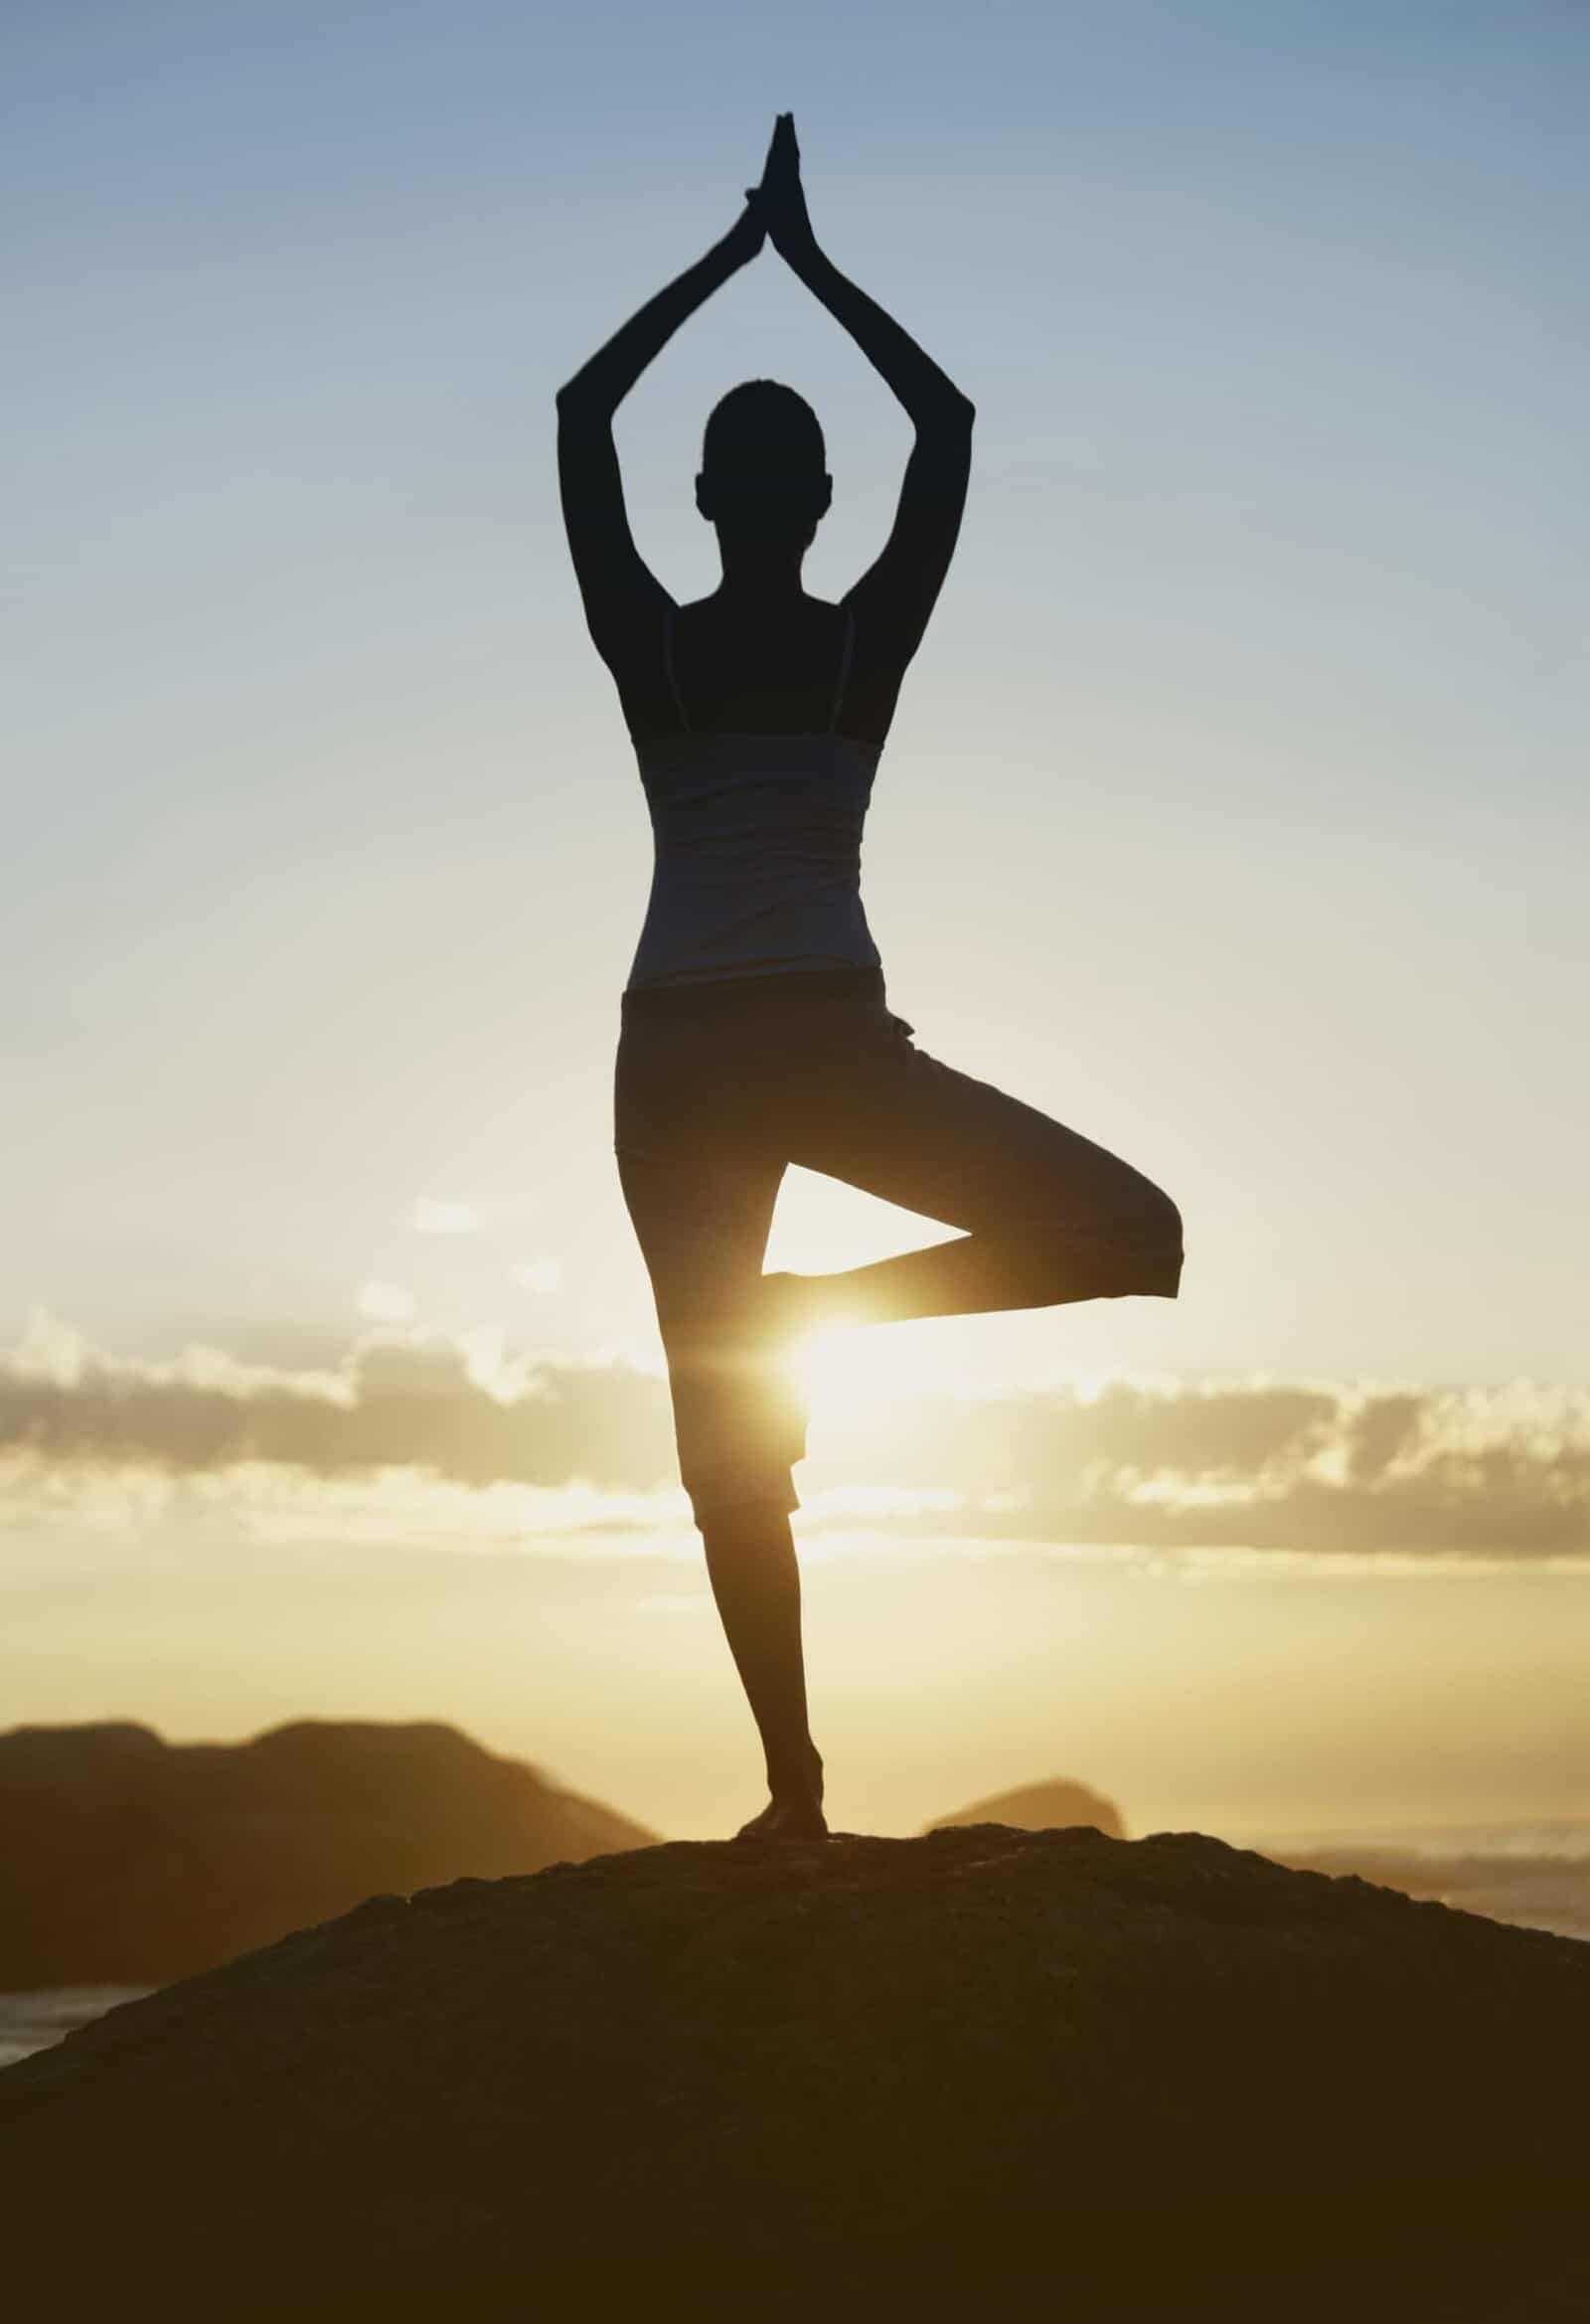 Silhouette of a woman in standing yoga pose at sunset